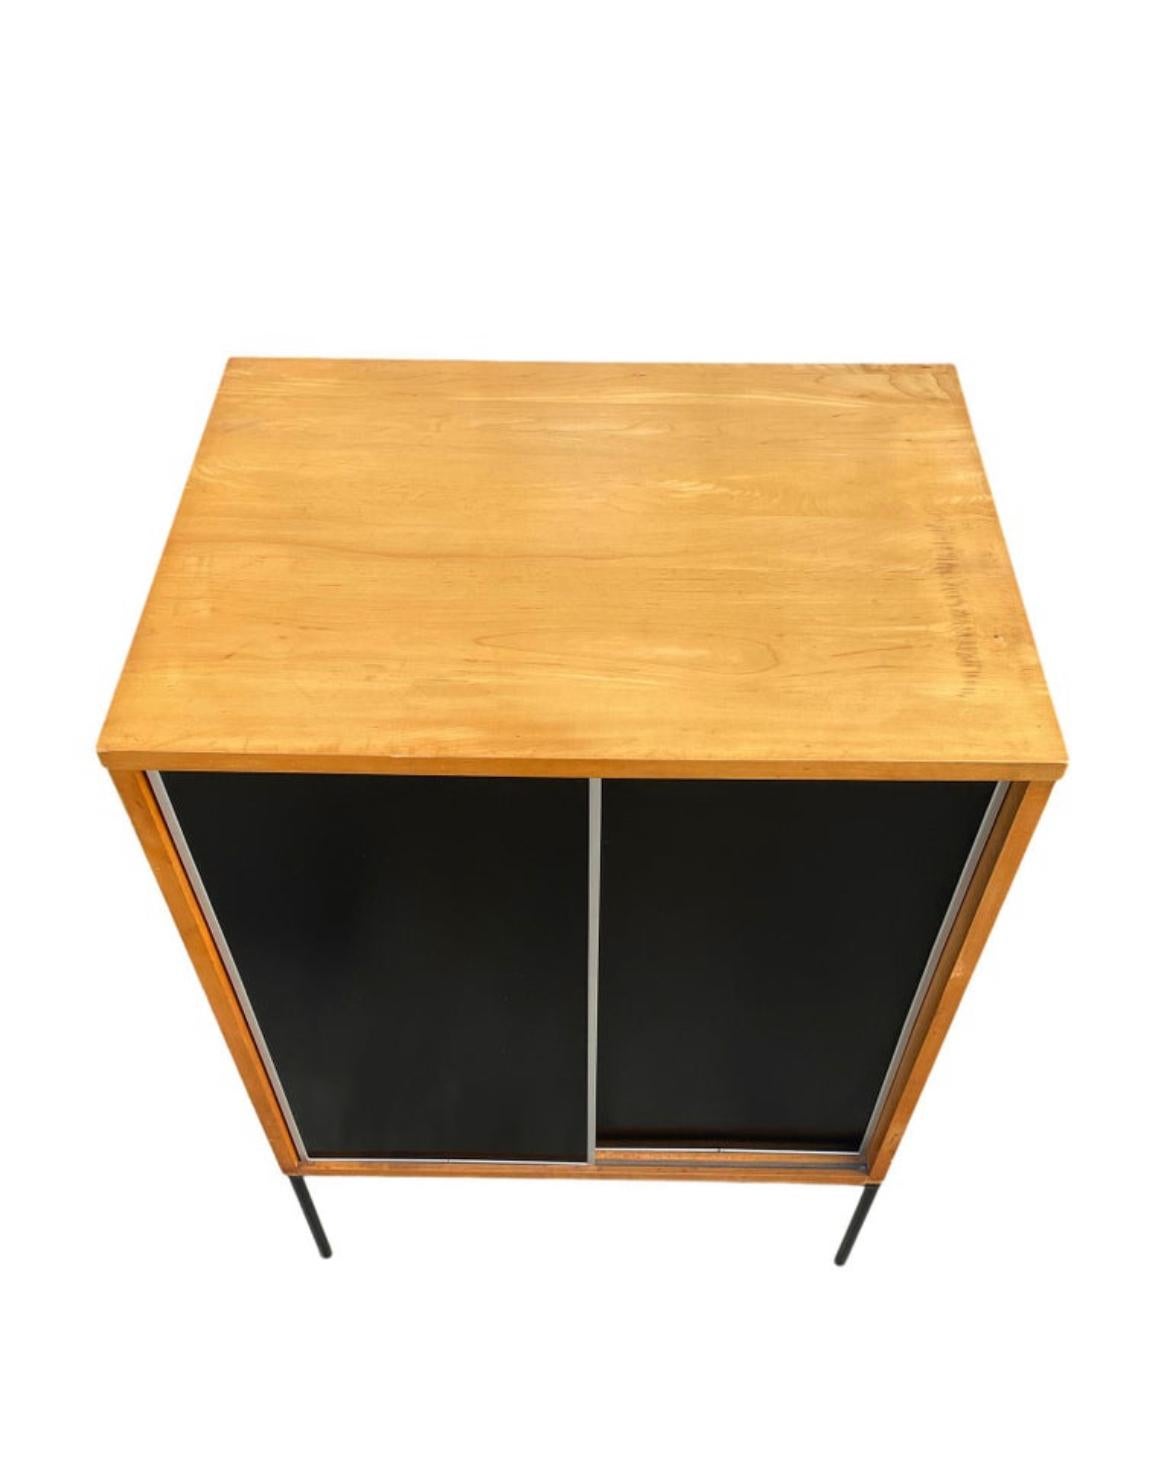 Mid-Century Modern Midcentury Small Maple Cabinet by Paul McCobb Planner Group #1512 B&W Doors For Sale